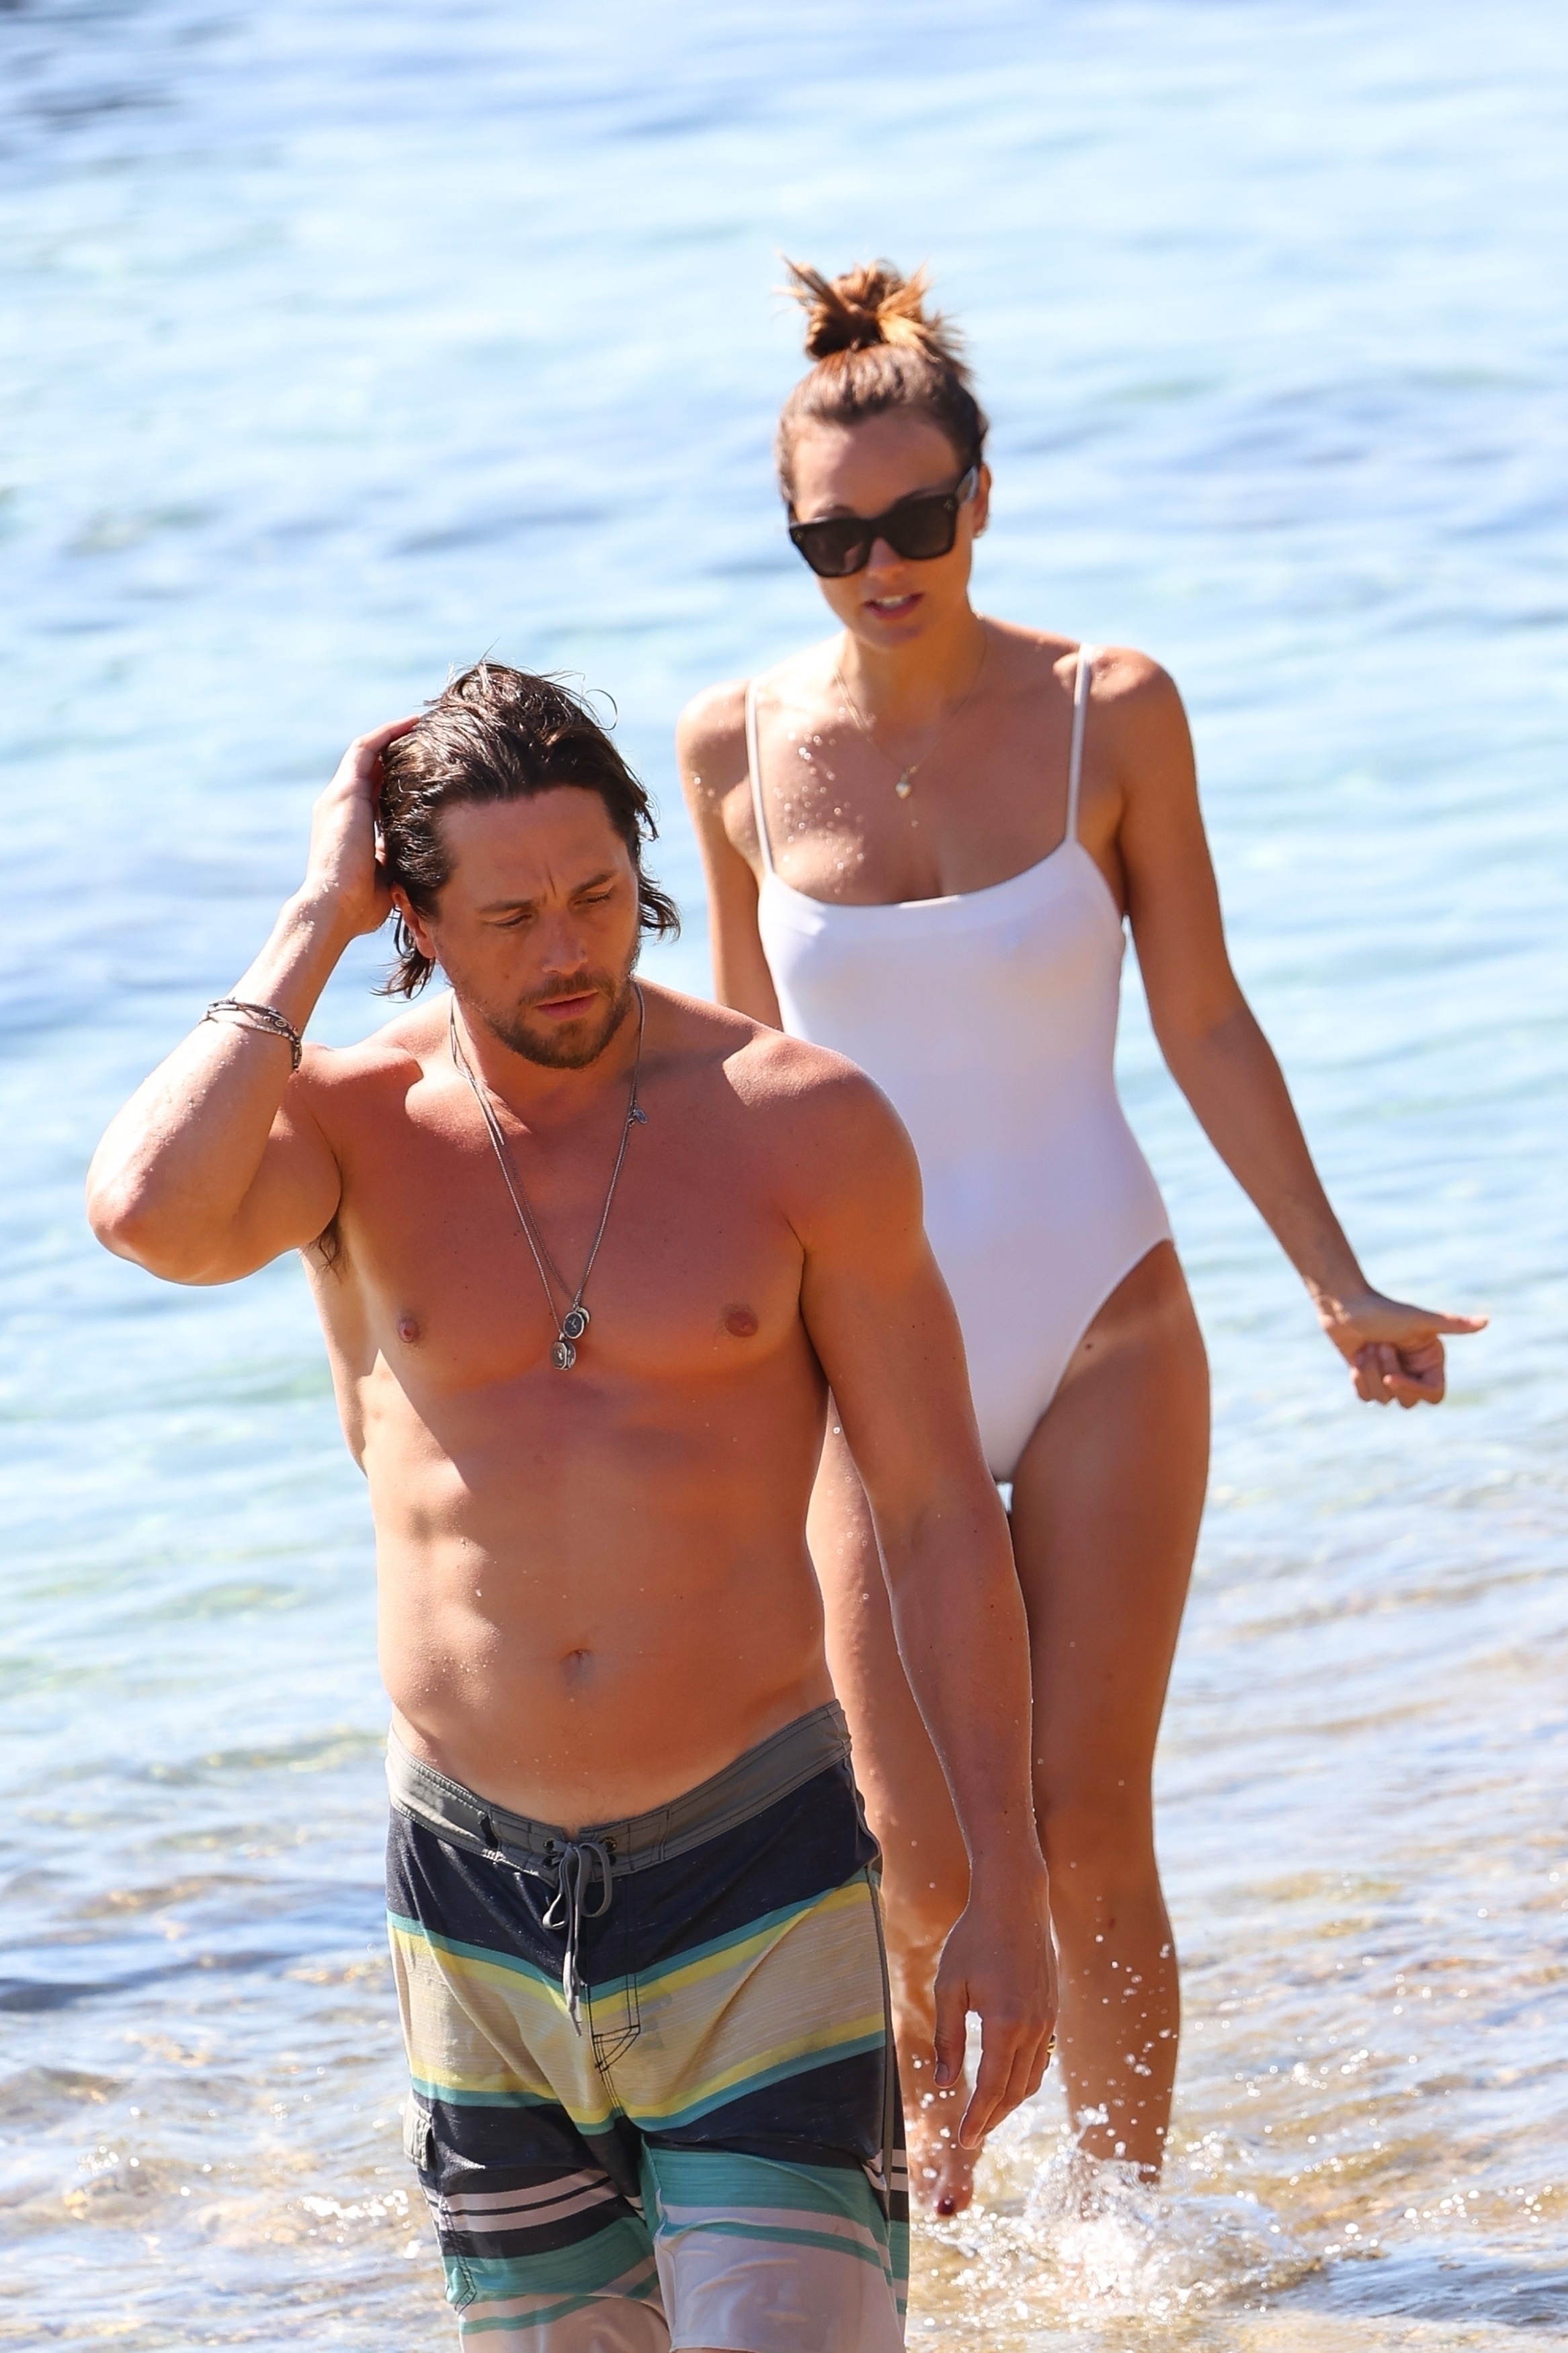 <p>Leila George and her "Animal Kingdom" co-star Ben Robson hit the beach together in Sydney, Australia, on March 18. </p><p>MORE: <a href="https://www.wonderwall.com/celebrity/celebrity-beach-bodies-2022-stars-in-bikinis-swimsuits-this-year-542229.gallery">The best photos of stars in swimsuits and bikinis in 2022</a></p>